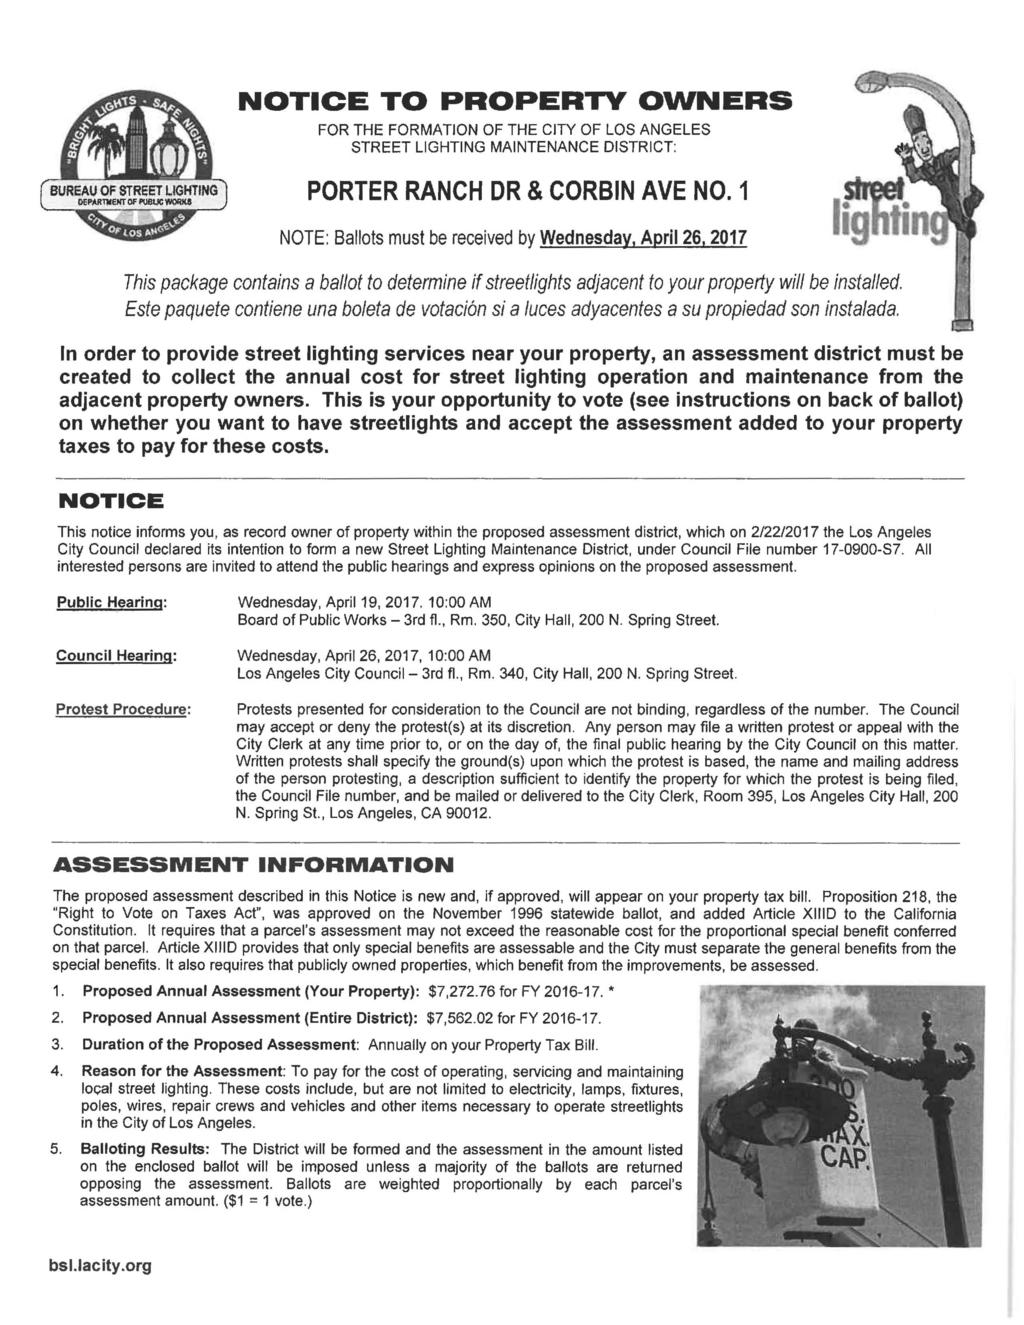 NOTICE TO PROPERTY OWNERS FOR THE FORMATION OF THE CITY OF LOS ANGELES STREET LIGHTING MAINTENANCE DISTRICT: BUREAU OF STREET LIGHTING DEPARTMENT OF CUBUC WORKS! PORTER RANCH DR & CORBIN AVE NO.